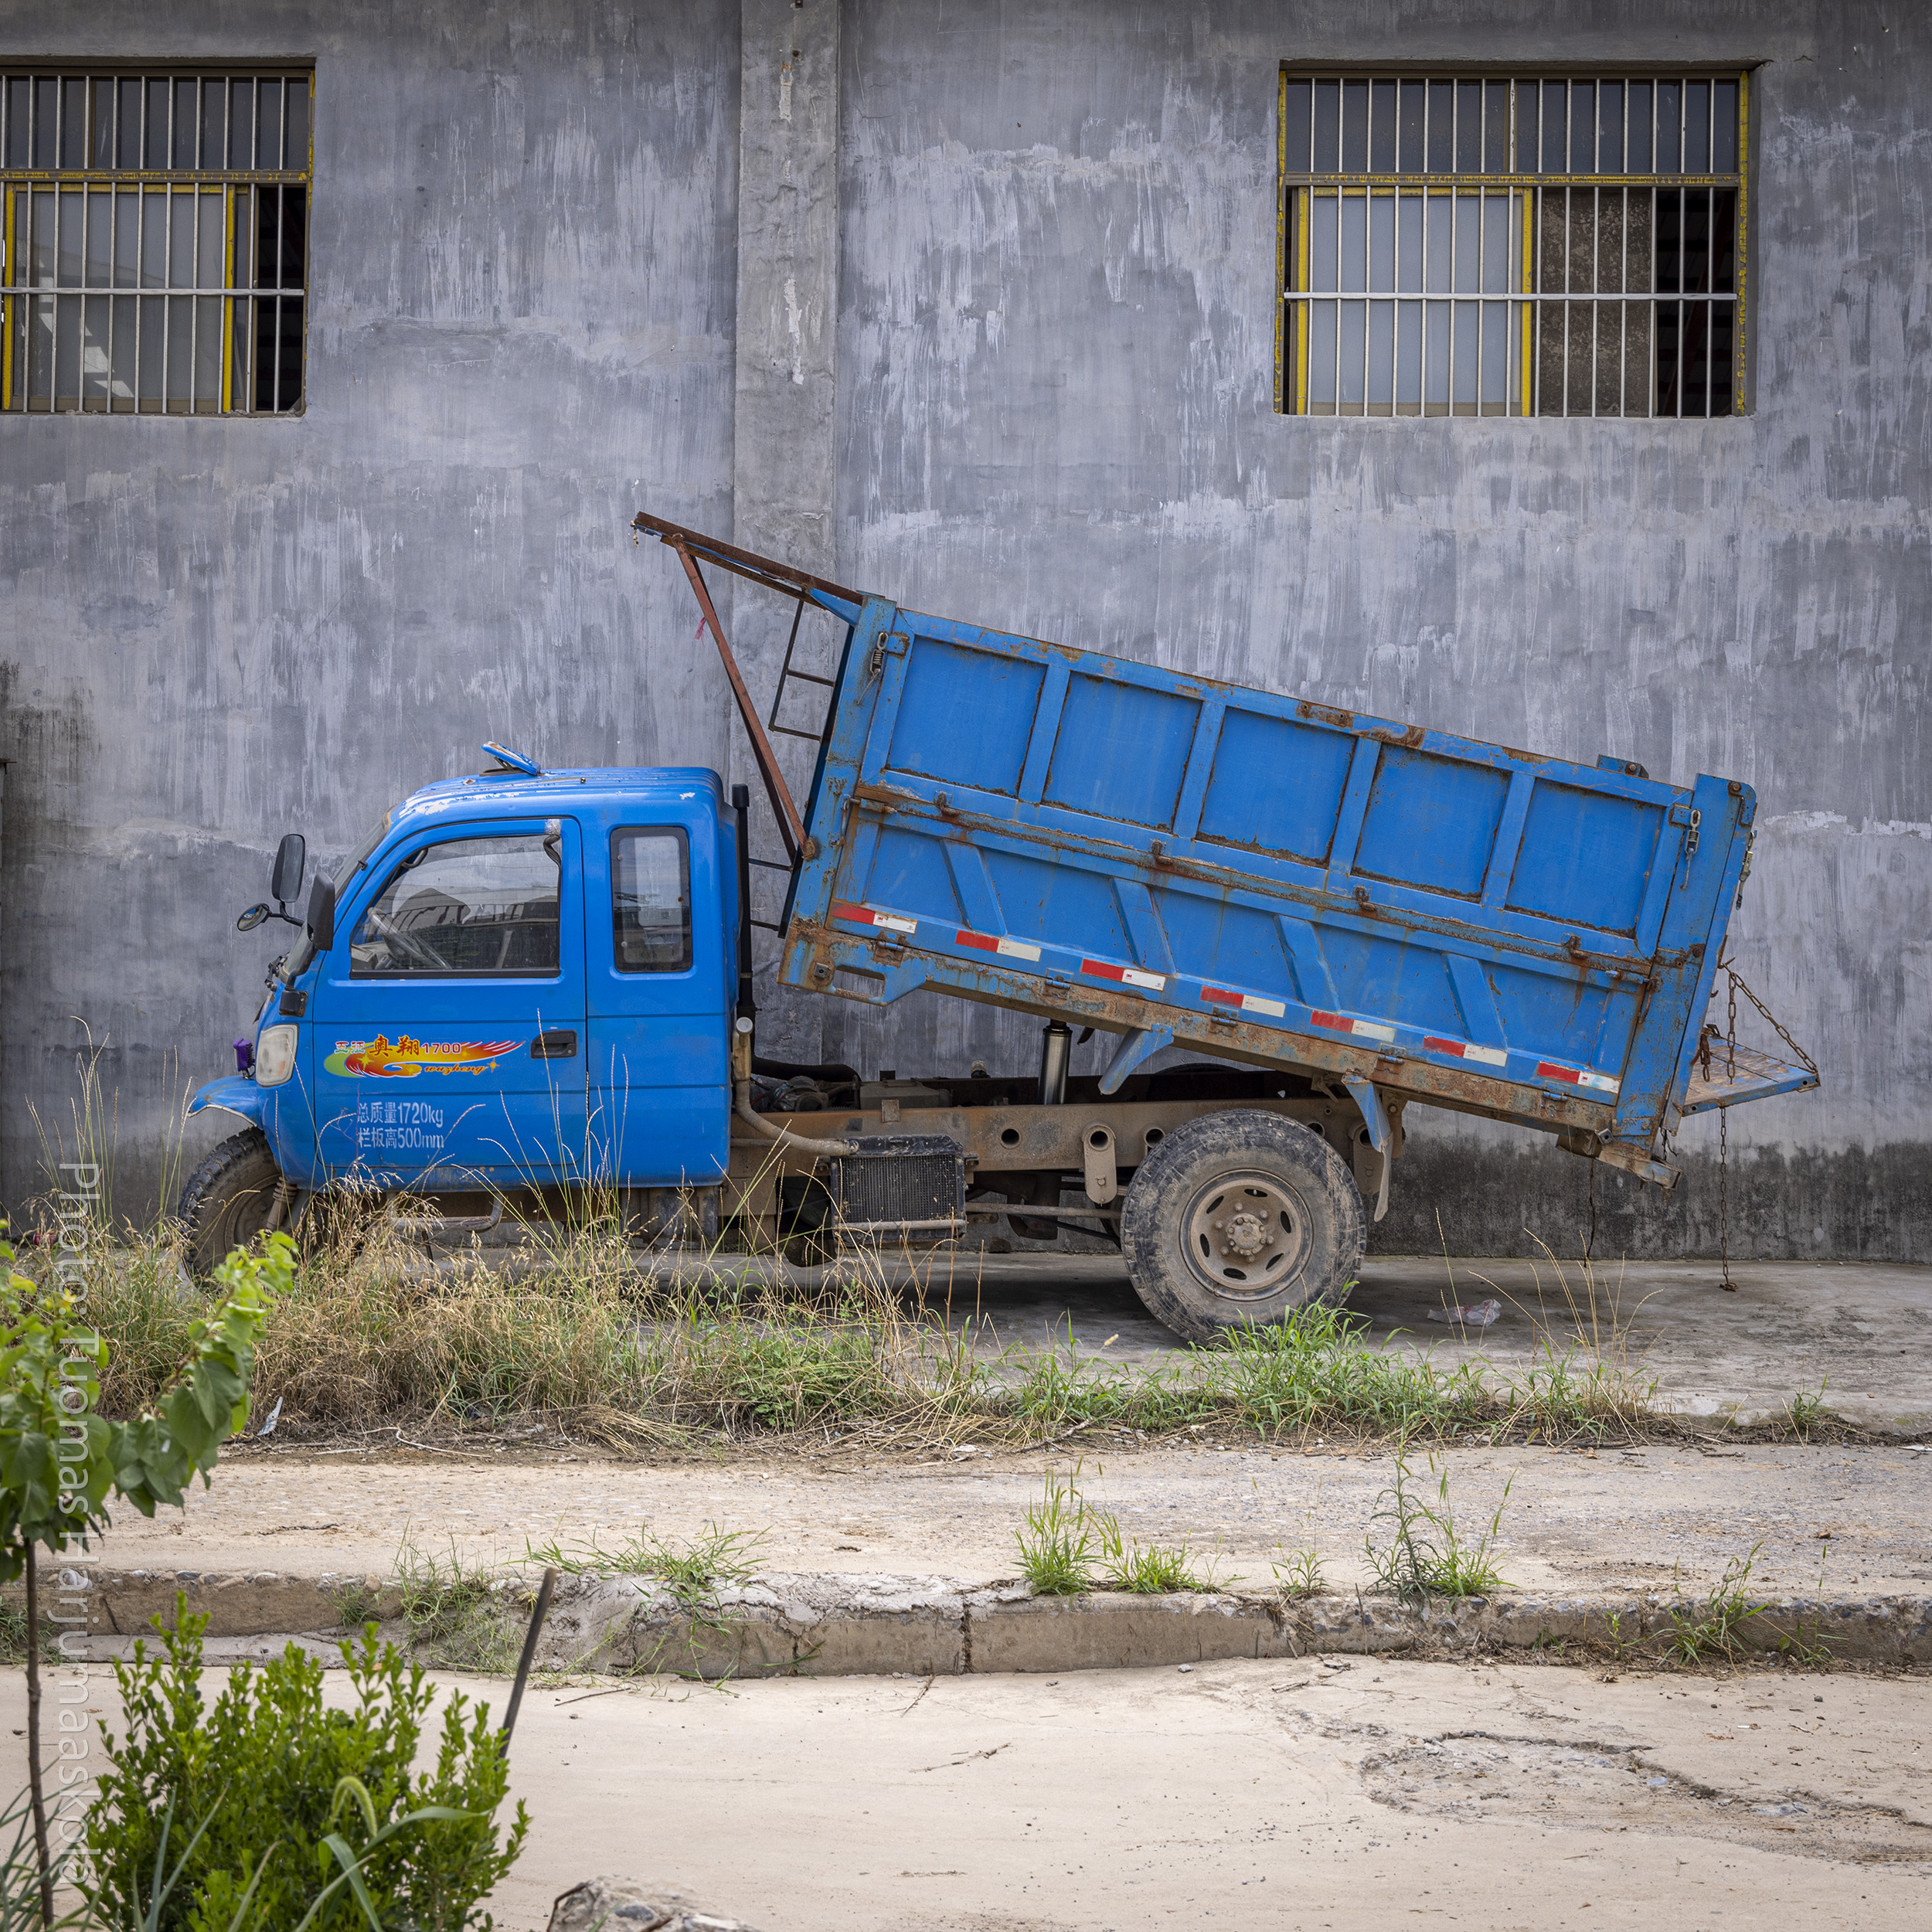 A blue Chinese tricycle truck, 3-wheeler truck with the bed lifted. Photographed against a concrete wall. Photographer Tuomas Harjumaaskola.